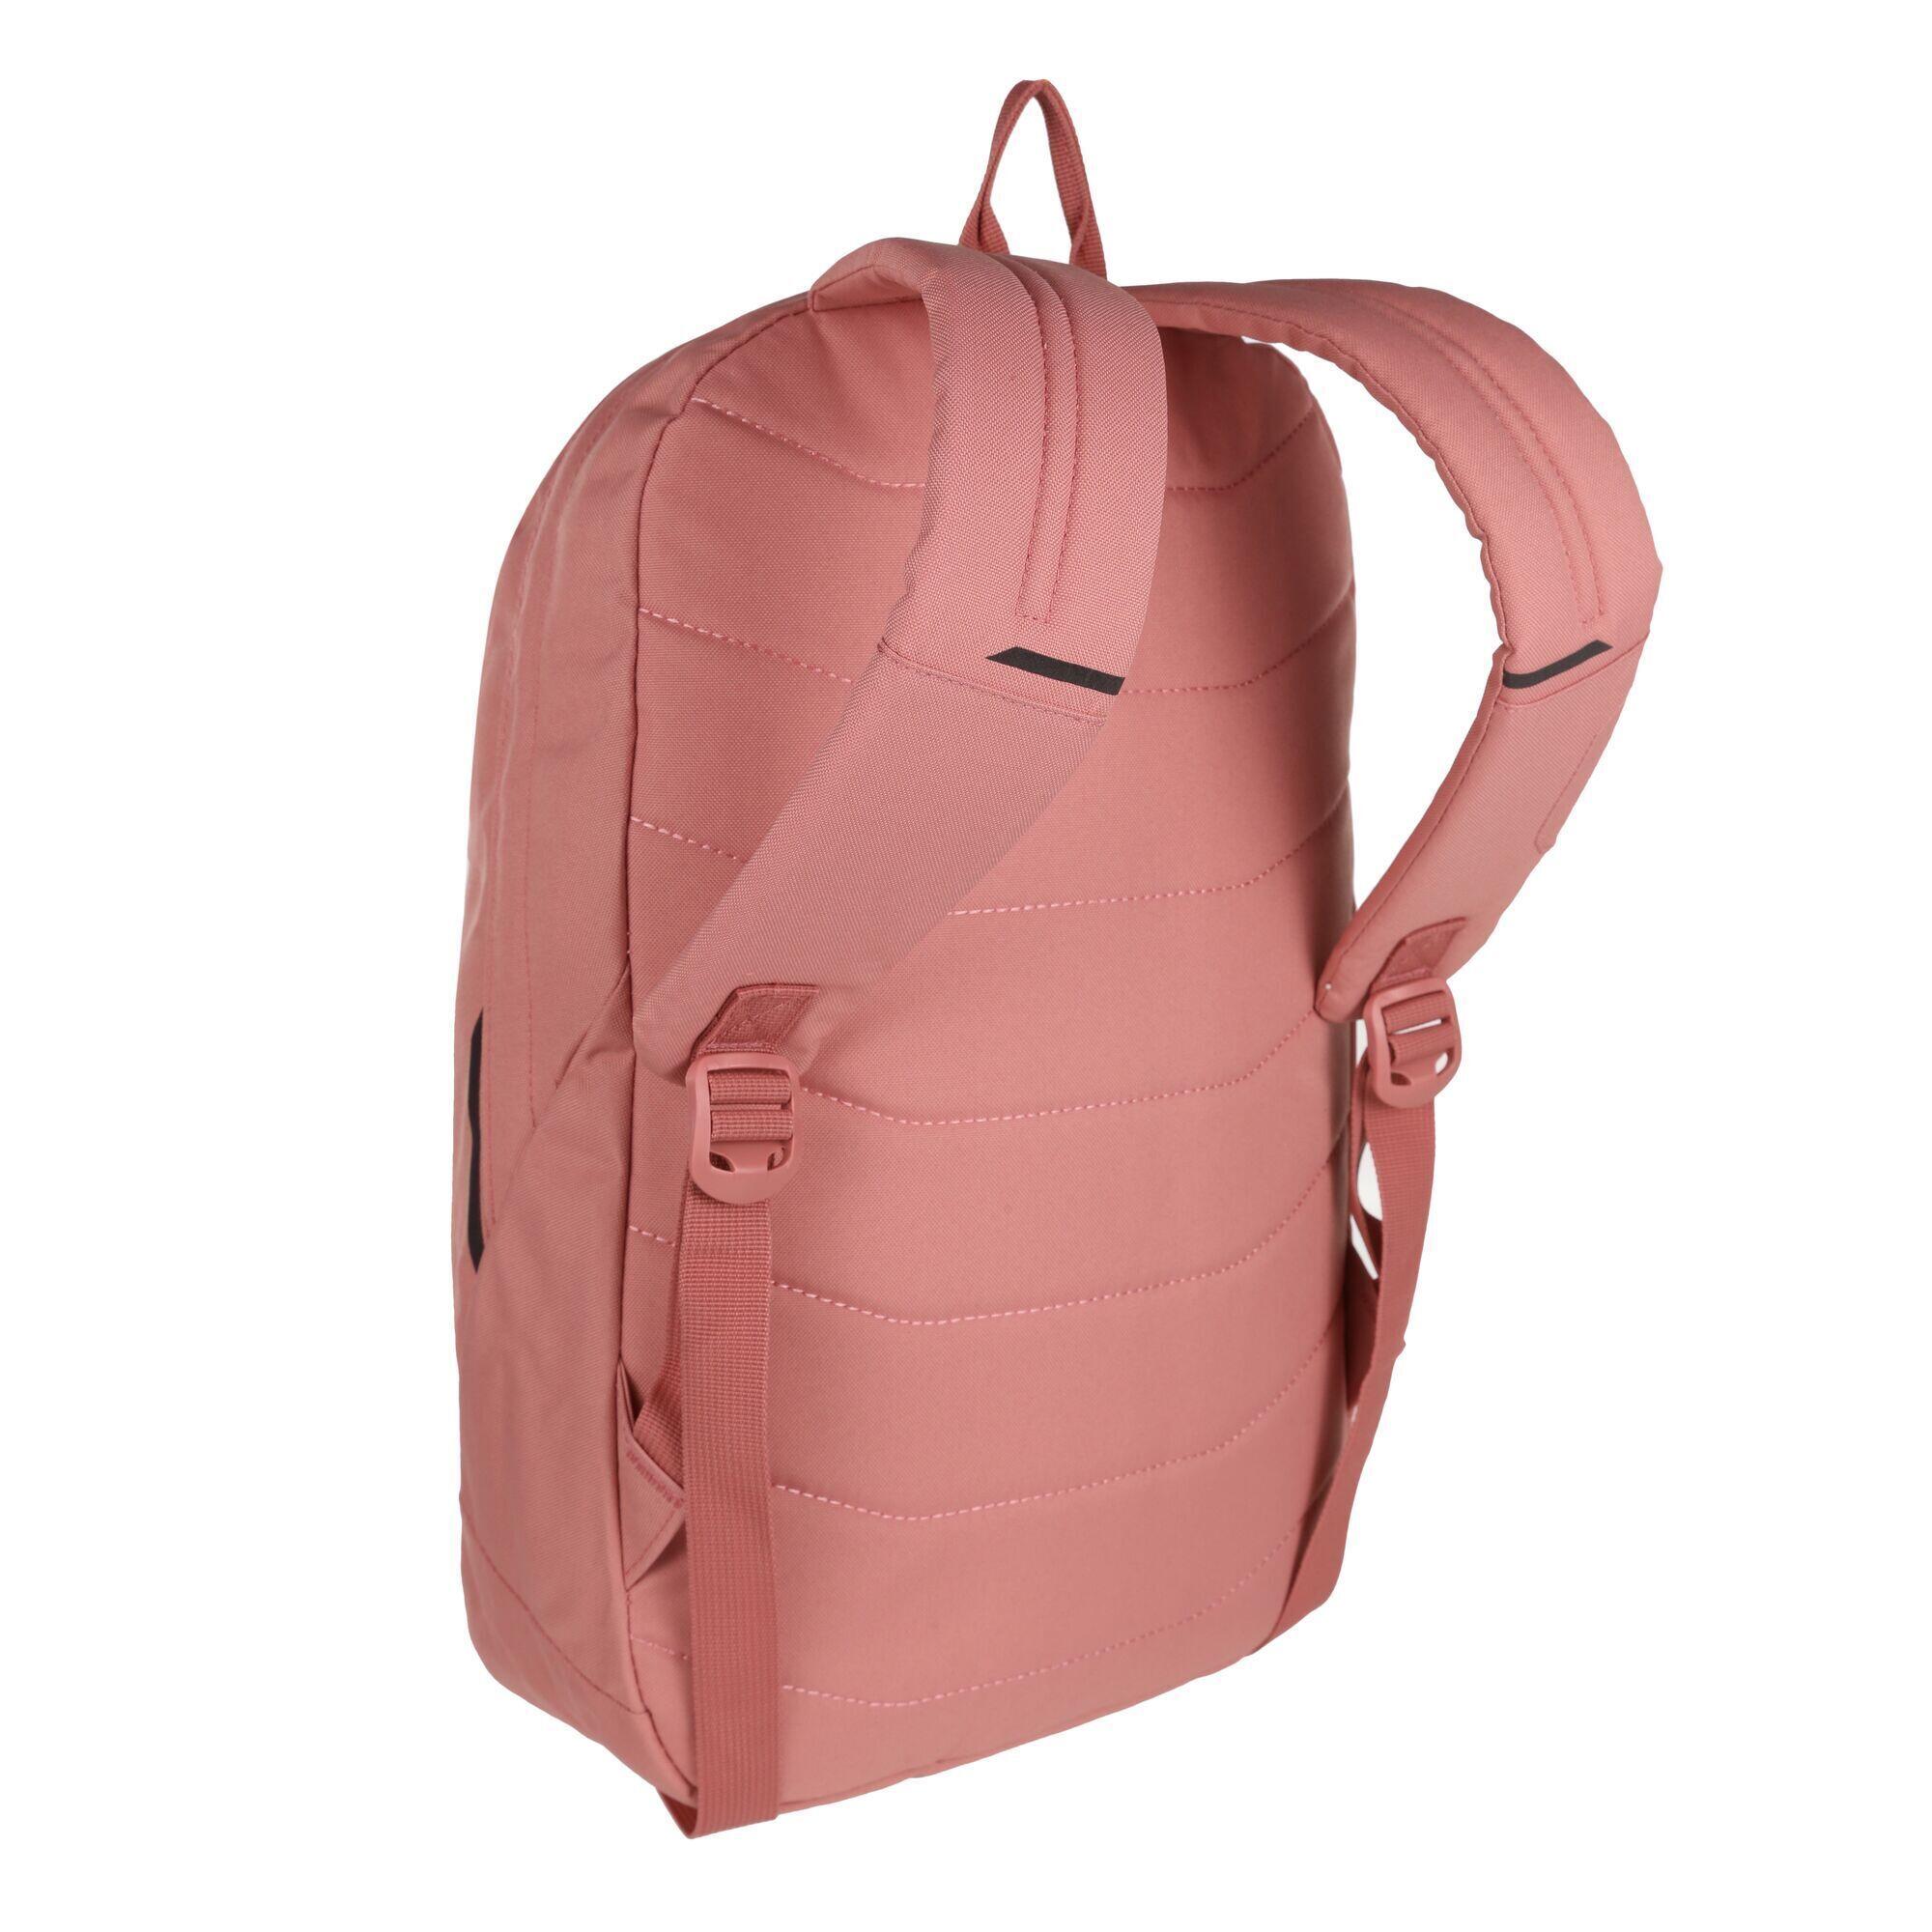 Backpack (Dusty Rose) 2/4